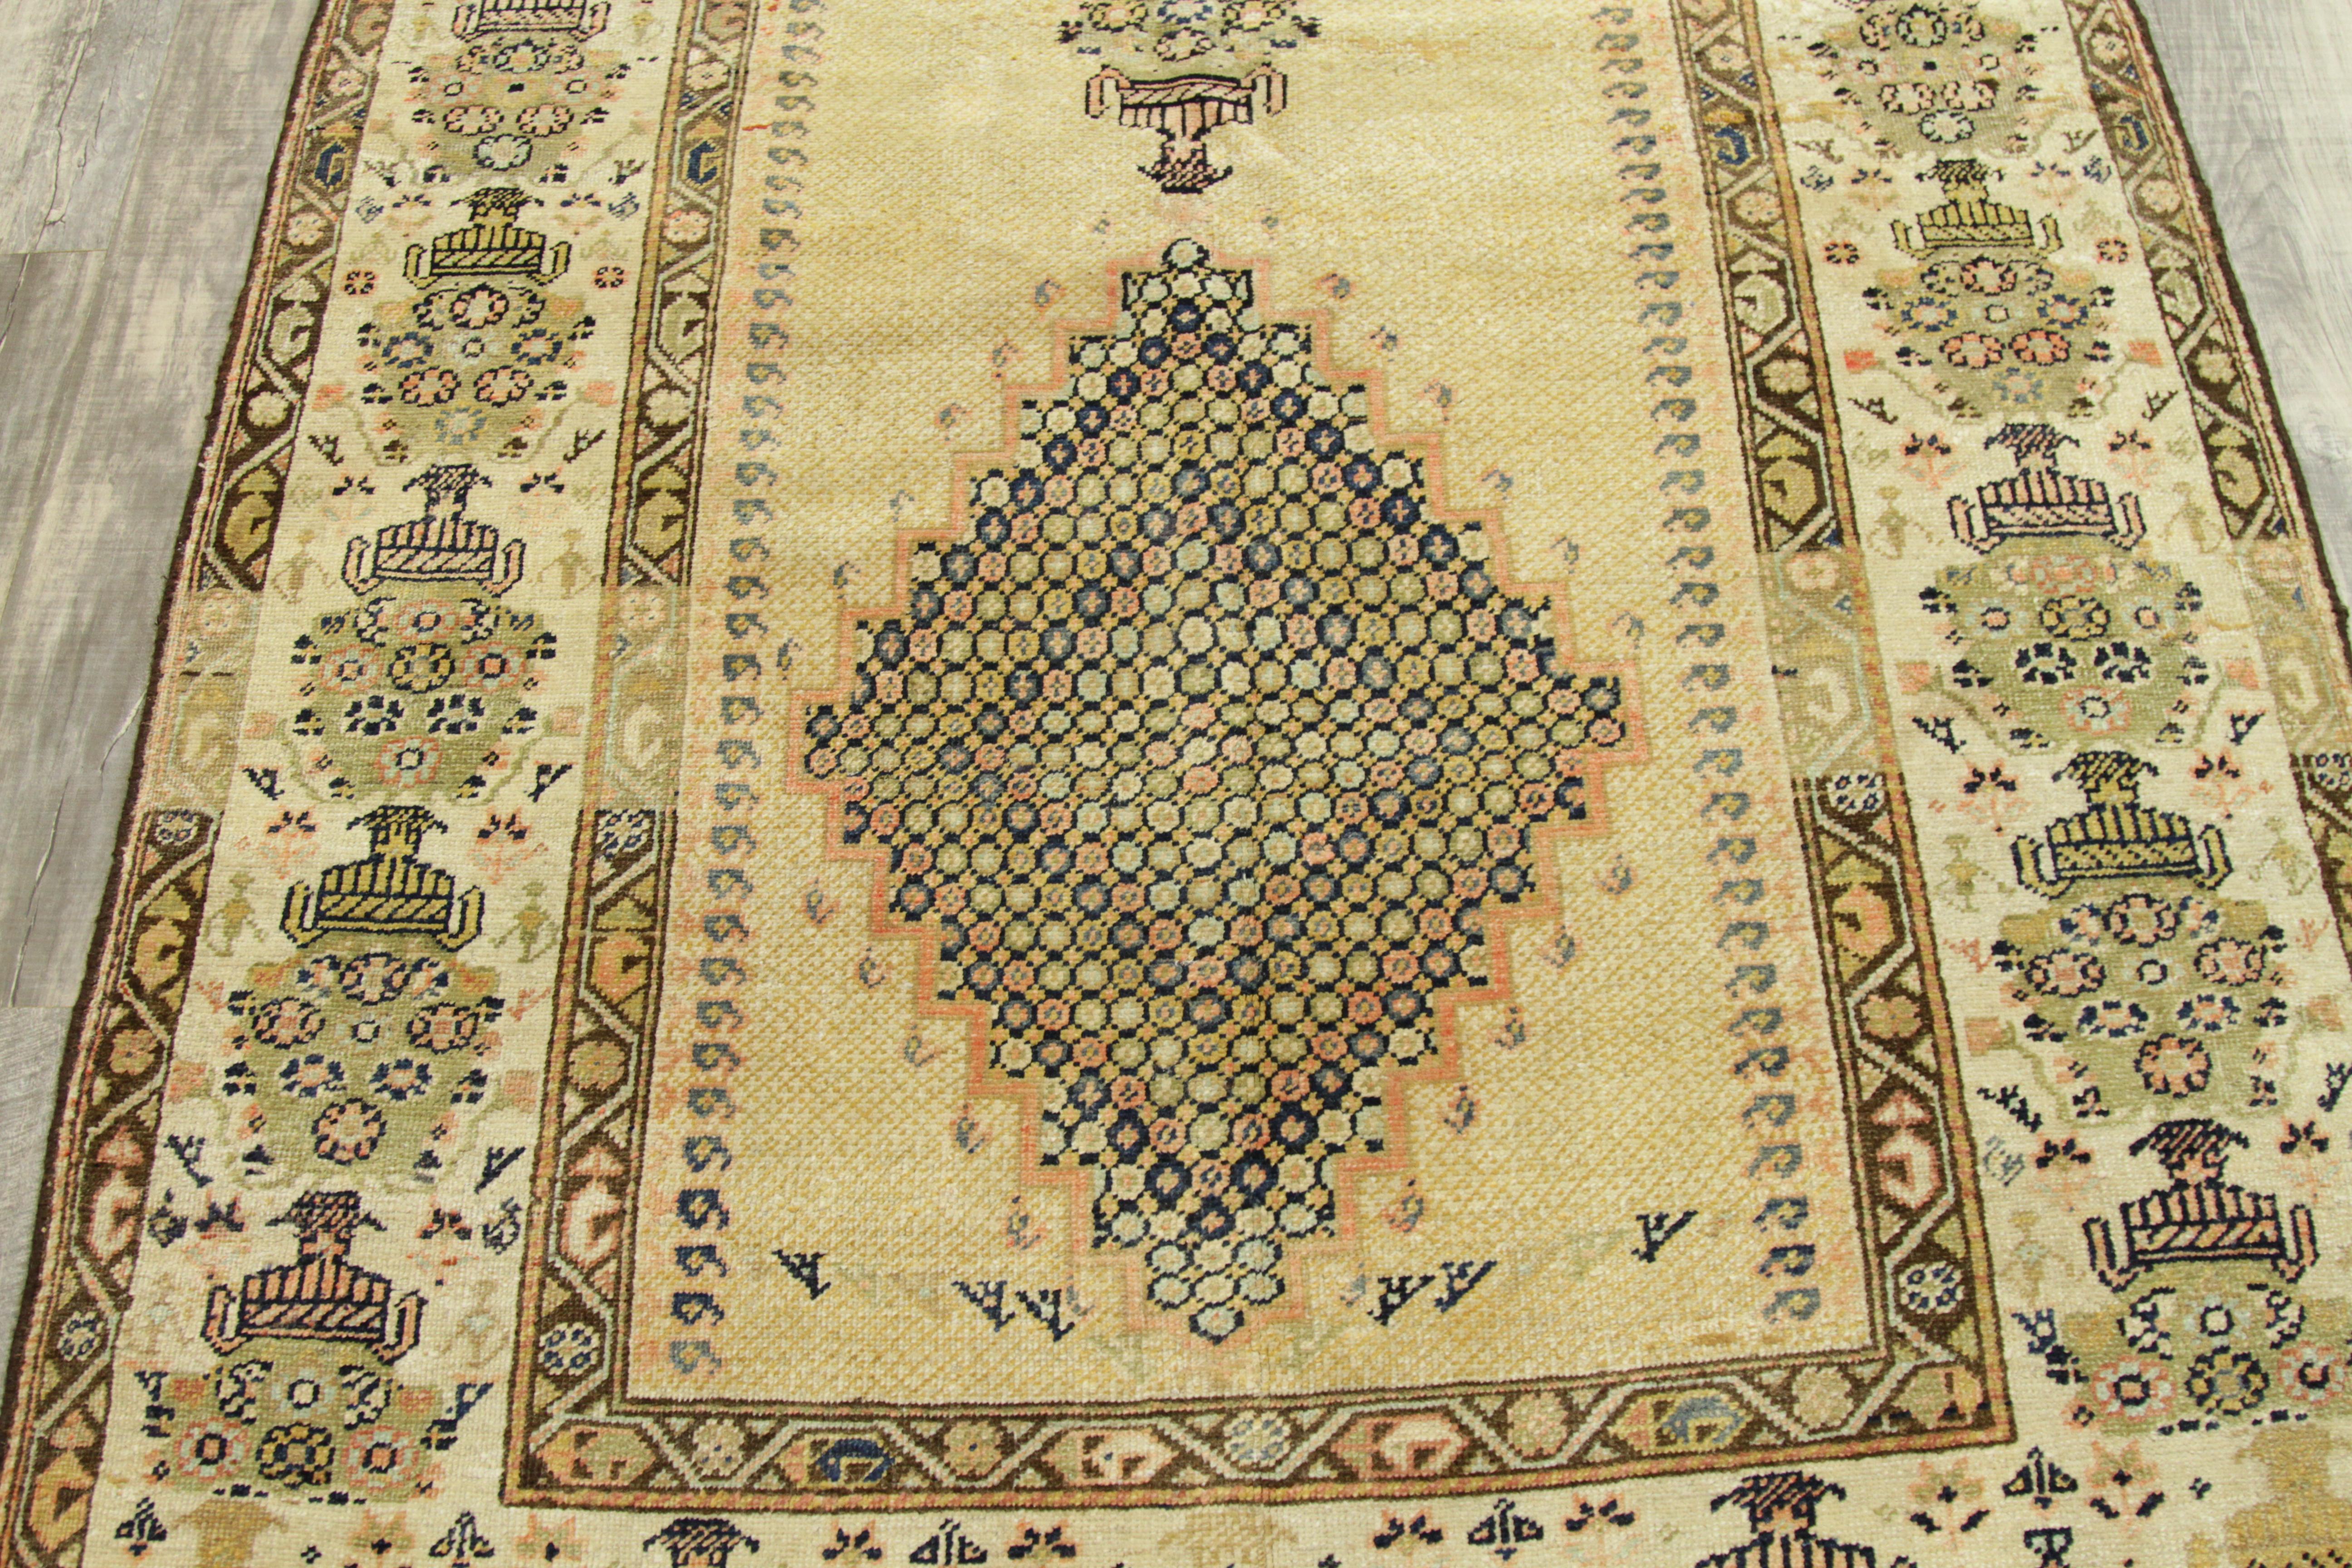 Antique Persian Rug in Sarab Design with Vivid Border Details, circa 1910s In Good Condition For Sale In Dallas, TX